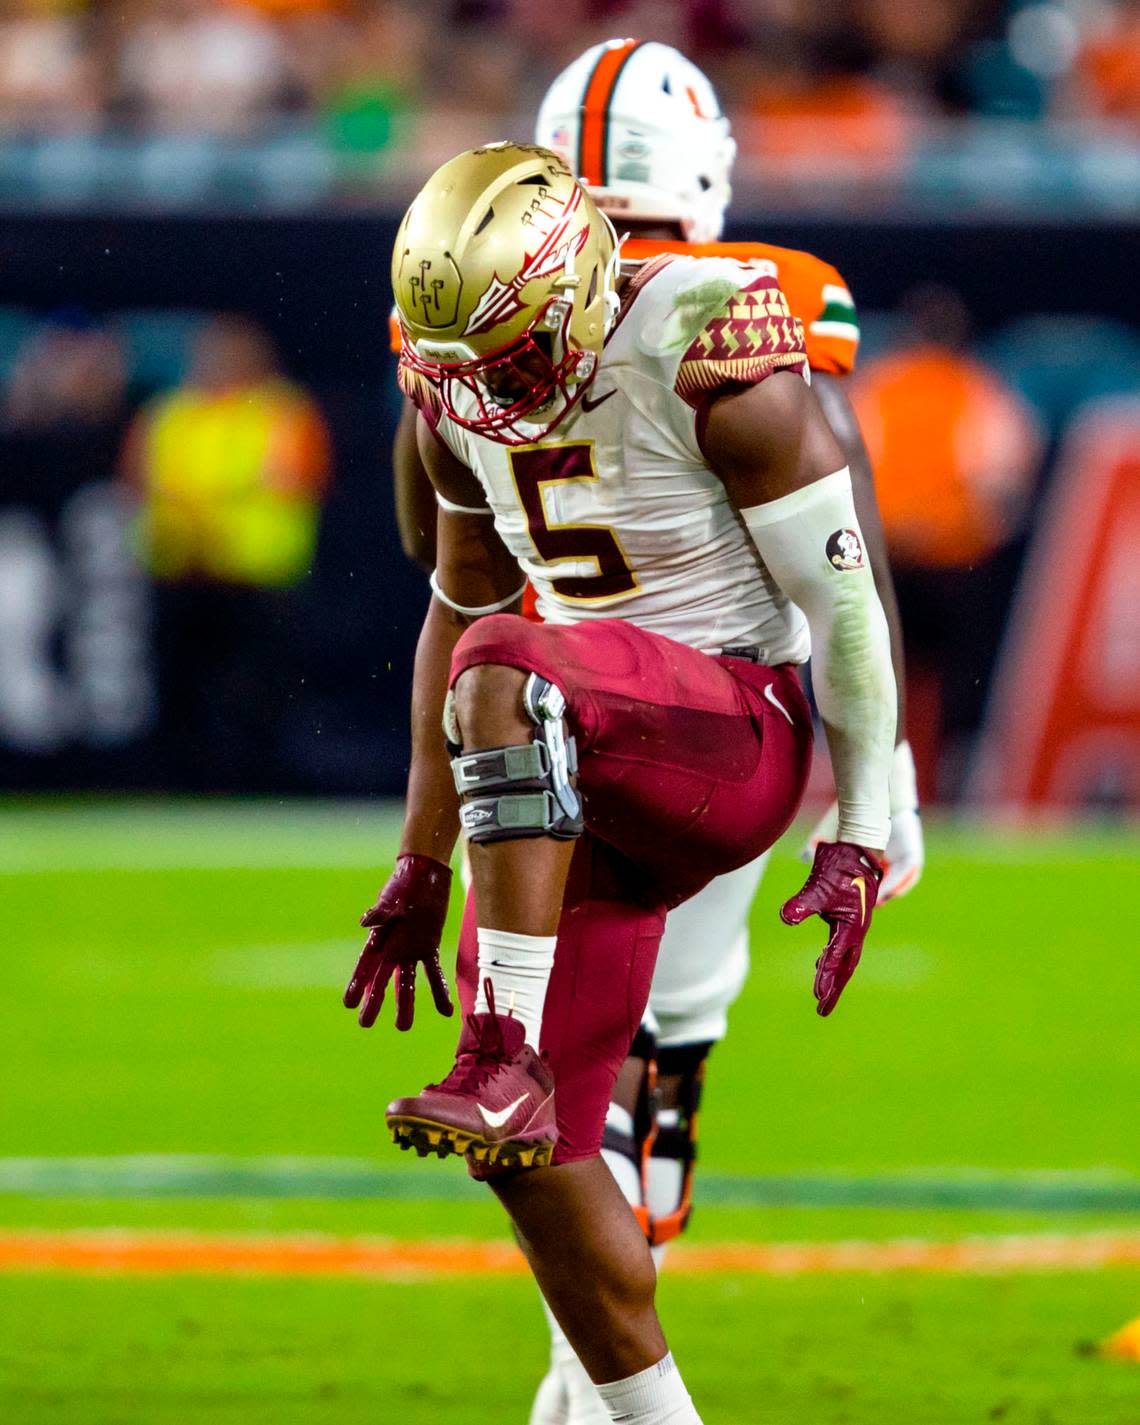 Florida State University defensive end Jared Verse (5) motions as if ‘snapping the U’ after sacking University of Miami quarterback Jacurri Brown (11) during the first half of an ACC football game at Hard Rock Stadium in Miami Gardens on Saturday, November 5, 2022. D.A. Varela/dvarela@miamiherald.com